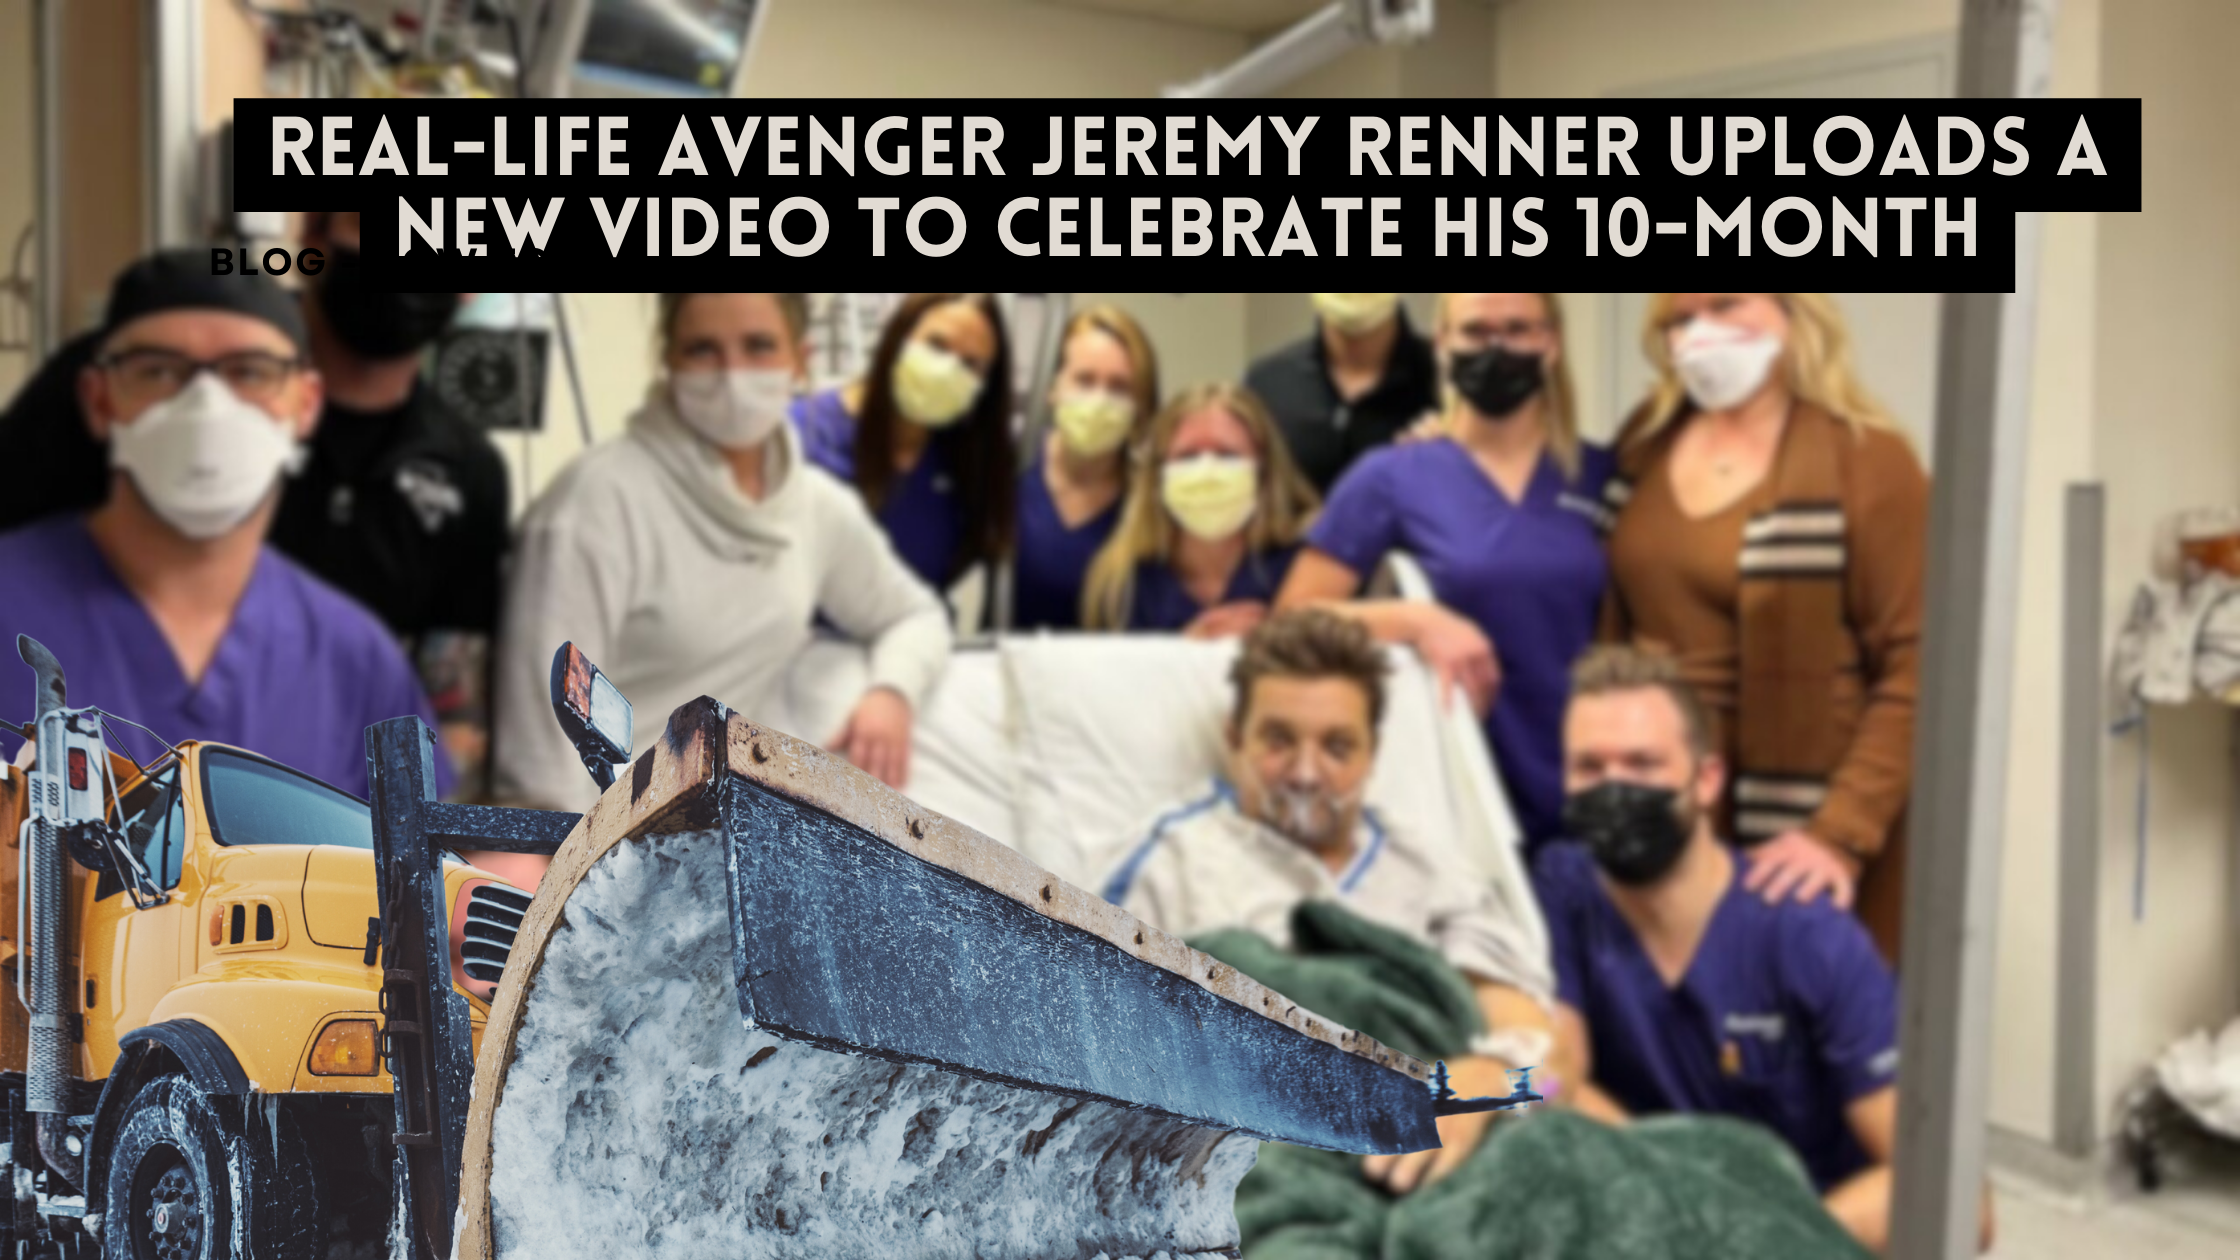 Real-Life Avenger Jeremy Renner Uploads a New Video to Celebrate His 10-Month